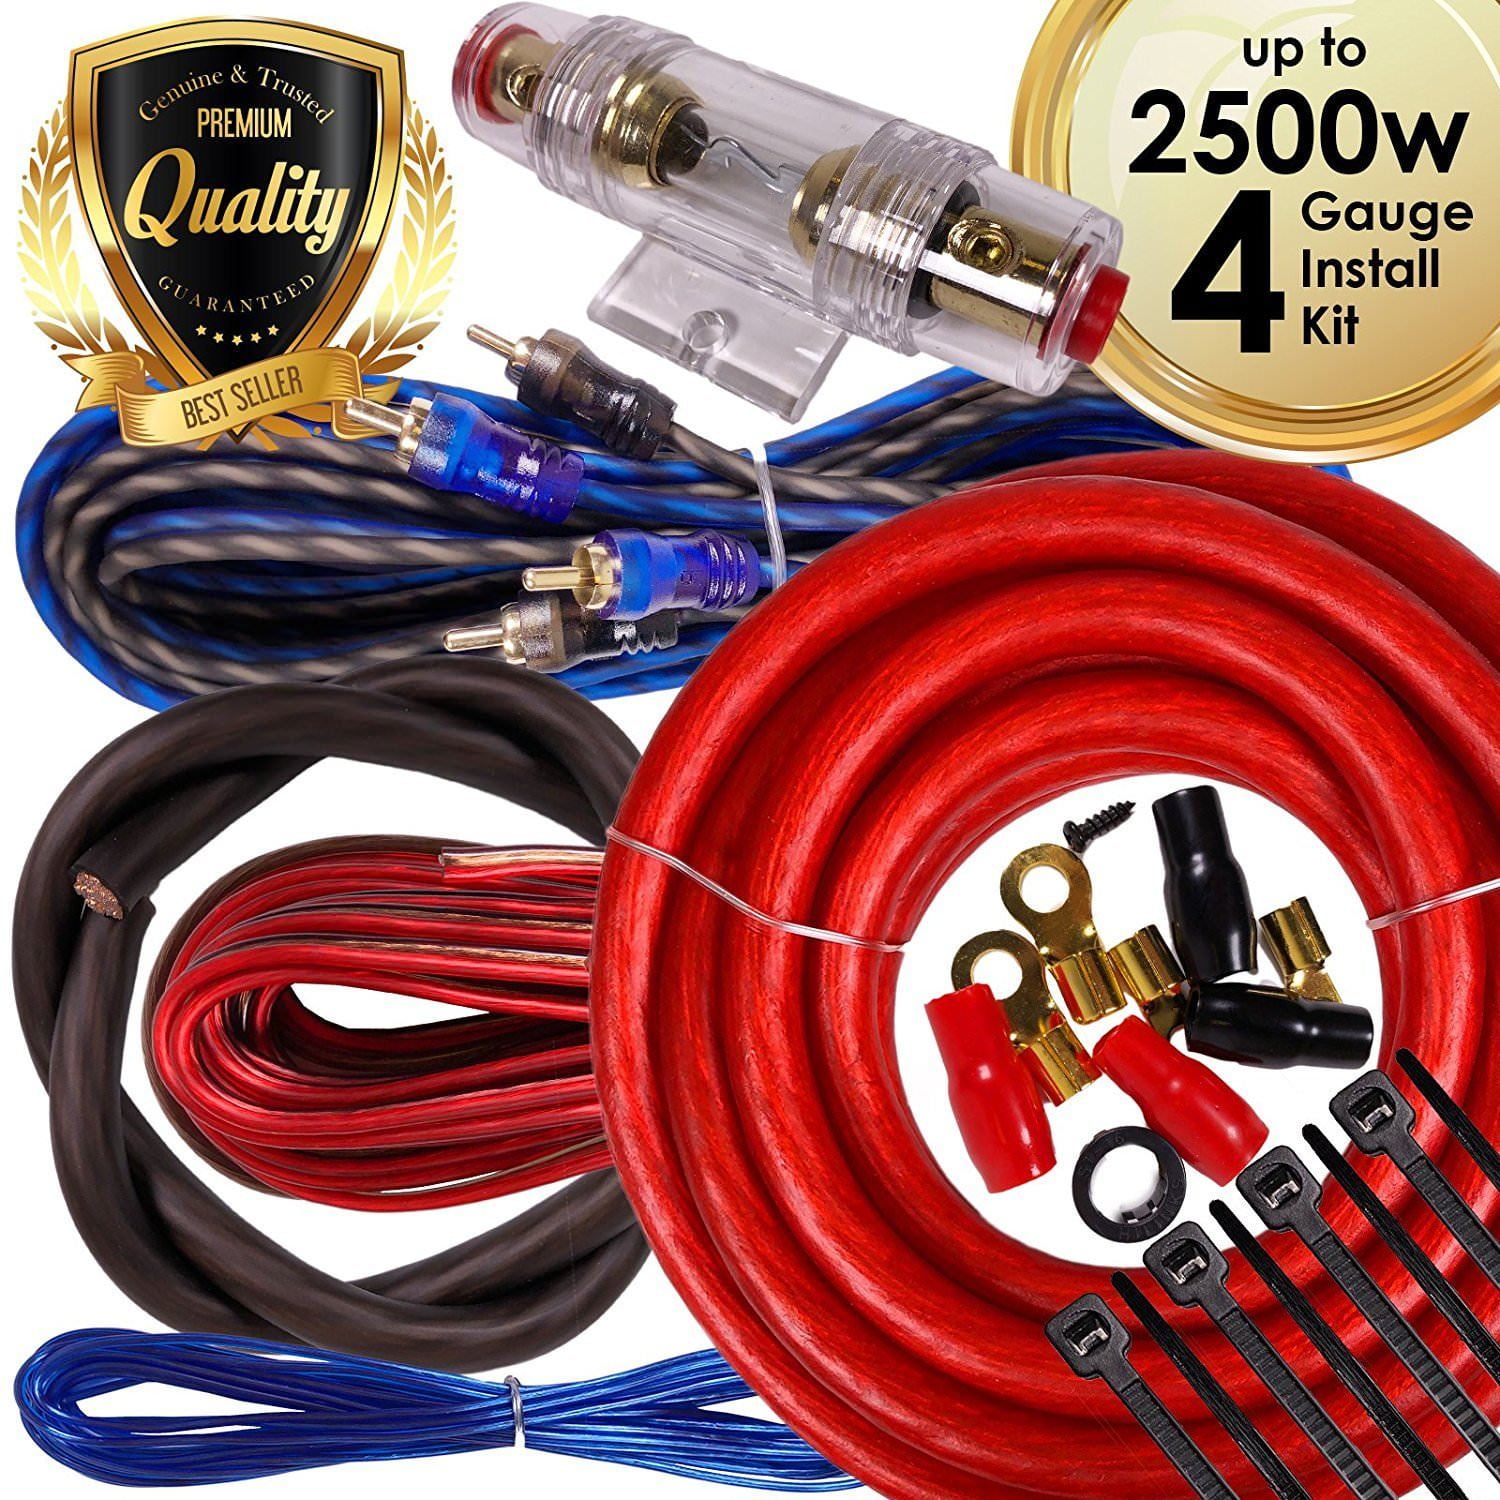 Pure Copper Primary Wire for Car Audio Speaker Amplifier Remote 12 Volt DC Automotive Trailer Harness Hookup Wiring GS Power 14 AWG 15 ft Black Combo American Wire Gauge 15 feet Red